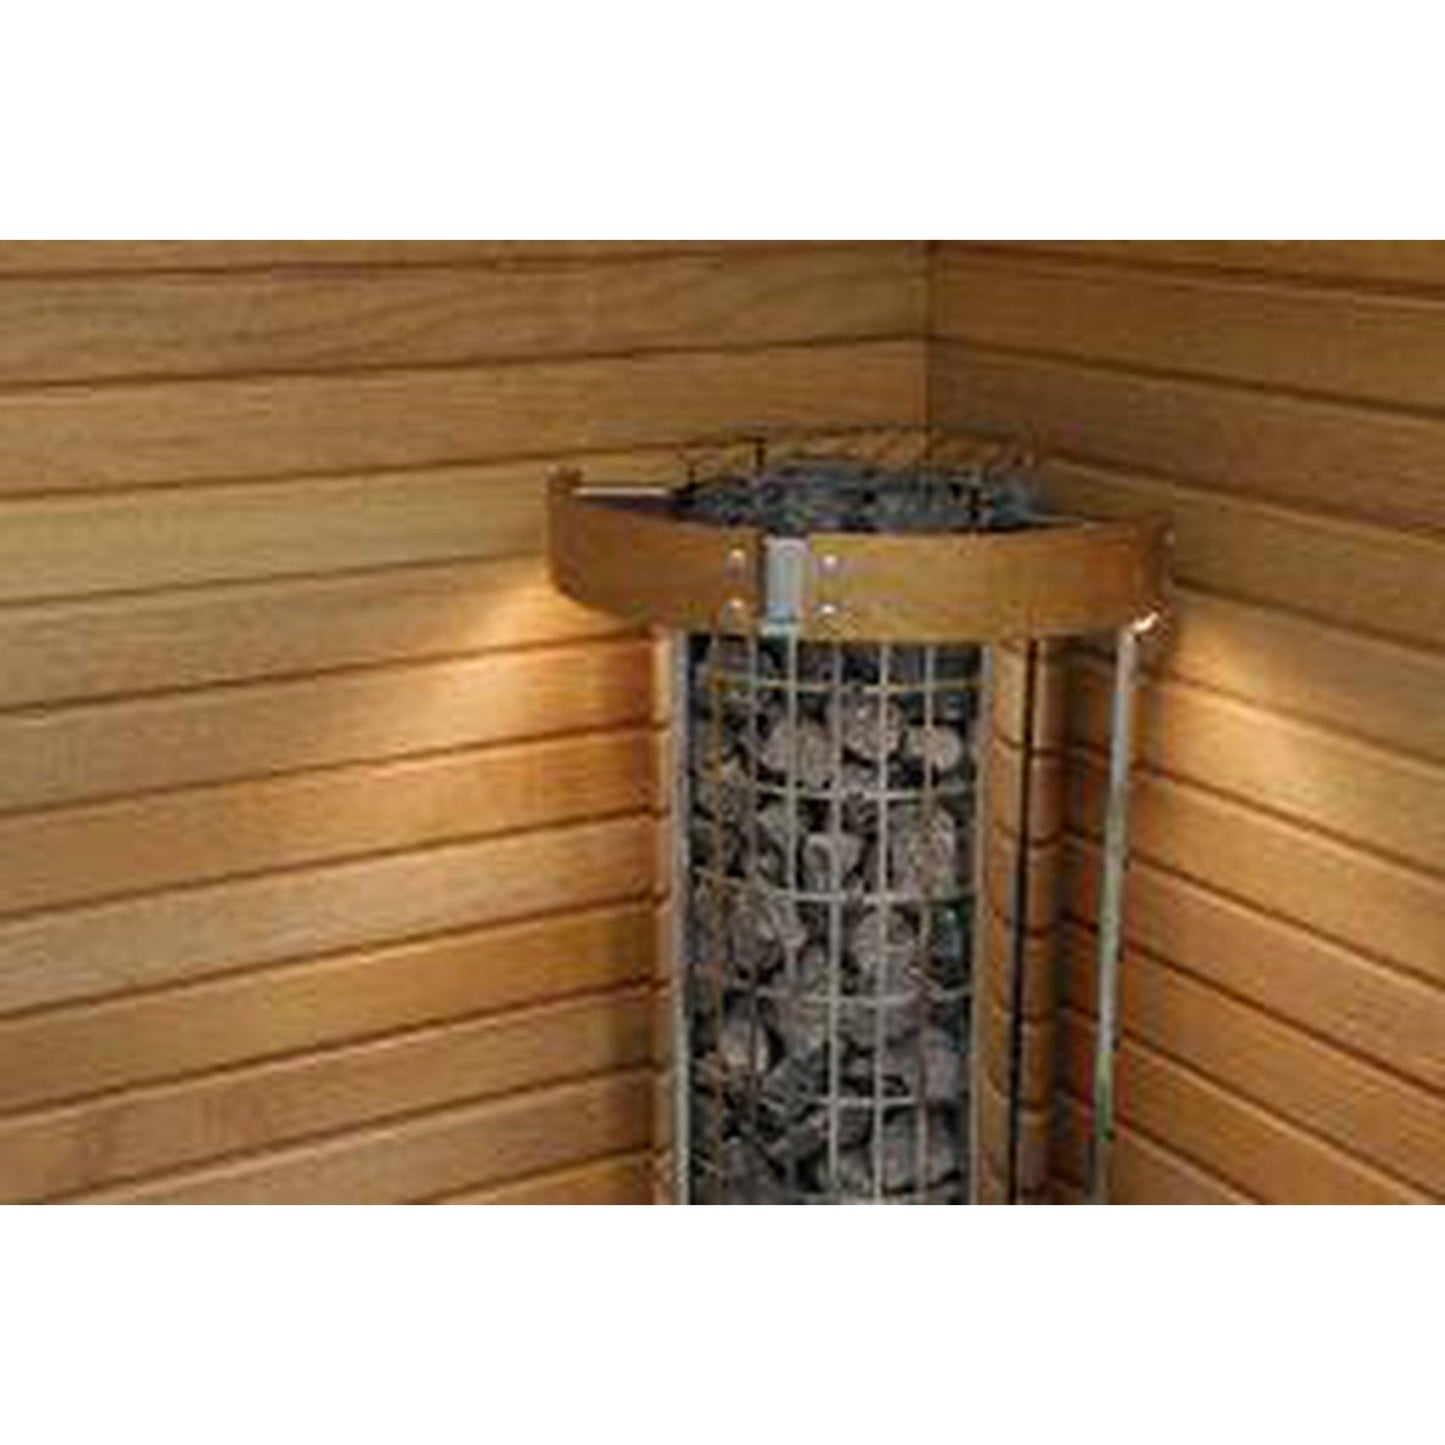 Harvia Cilindro Half Series 8 kW 240V 1PH Freestanding Stainless Steel Electric Sauna Heater